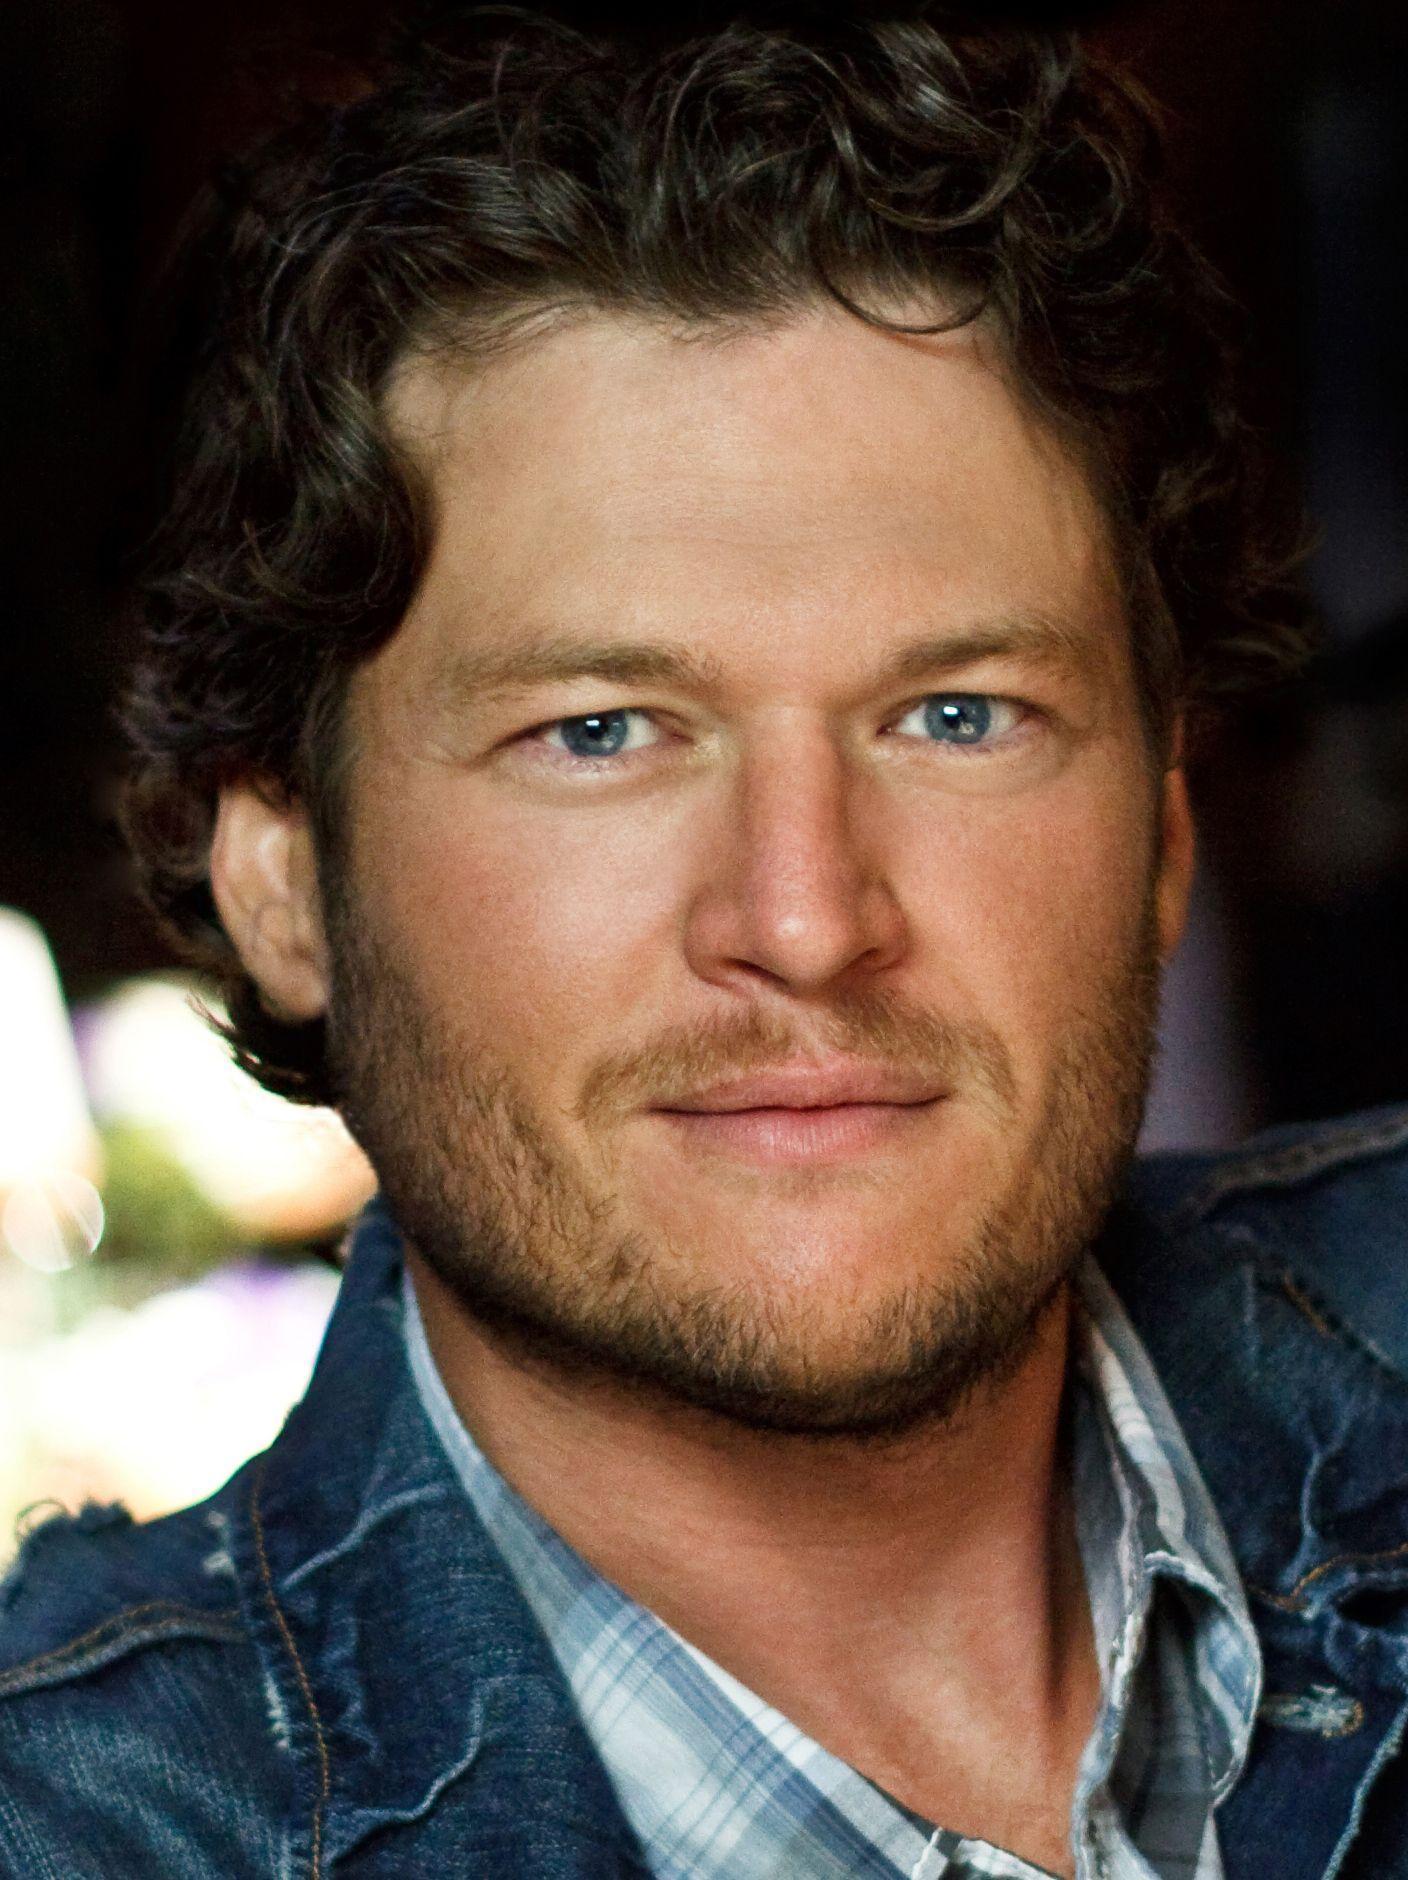 My Most Attractive Country Singers. More Blake shelton